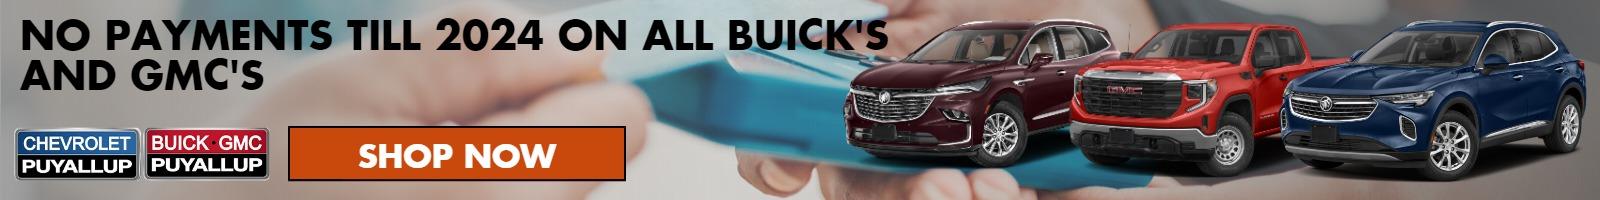 NO PAYMENTS TILL 2024 on ALL Buick's and GMC's in stock!